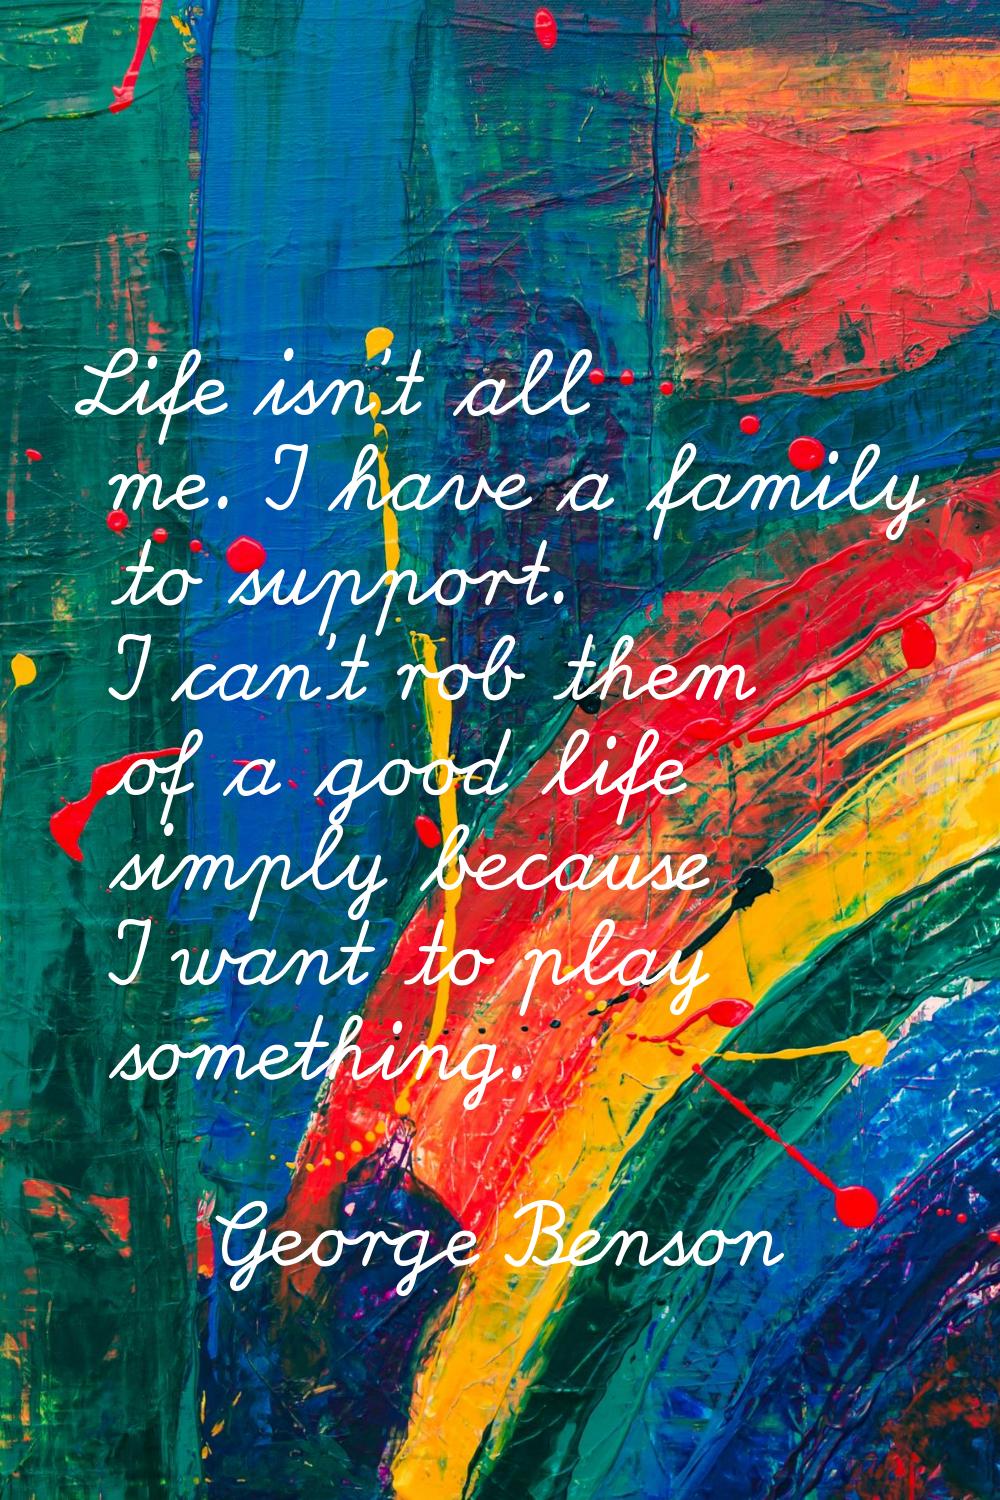 Life isn't all me. I have a family to support. I can't rob them of a good life simply because I wan